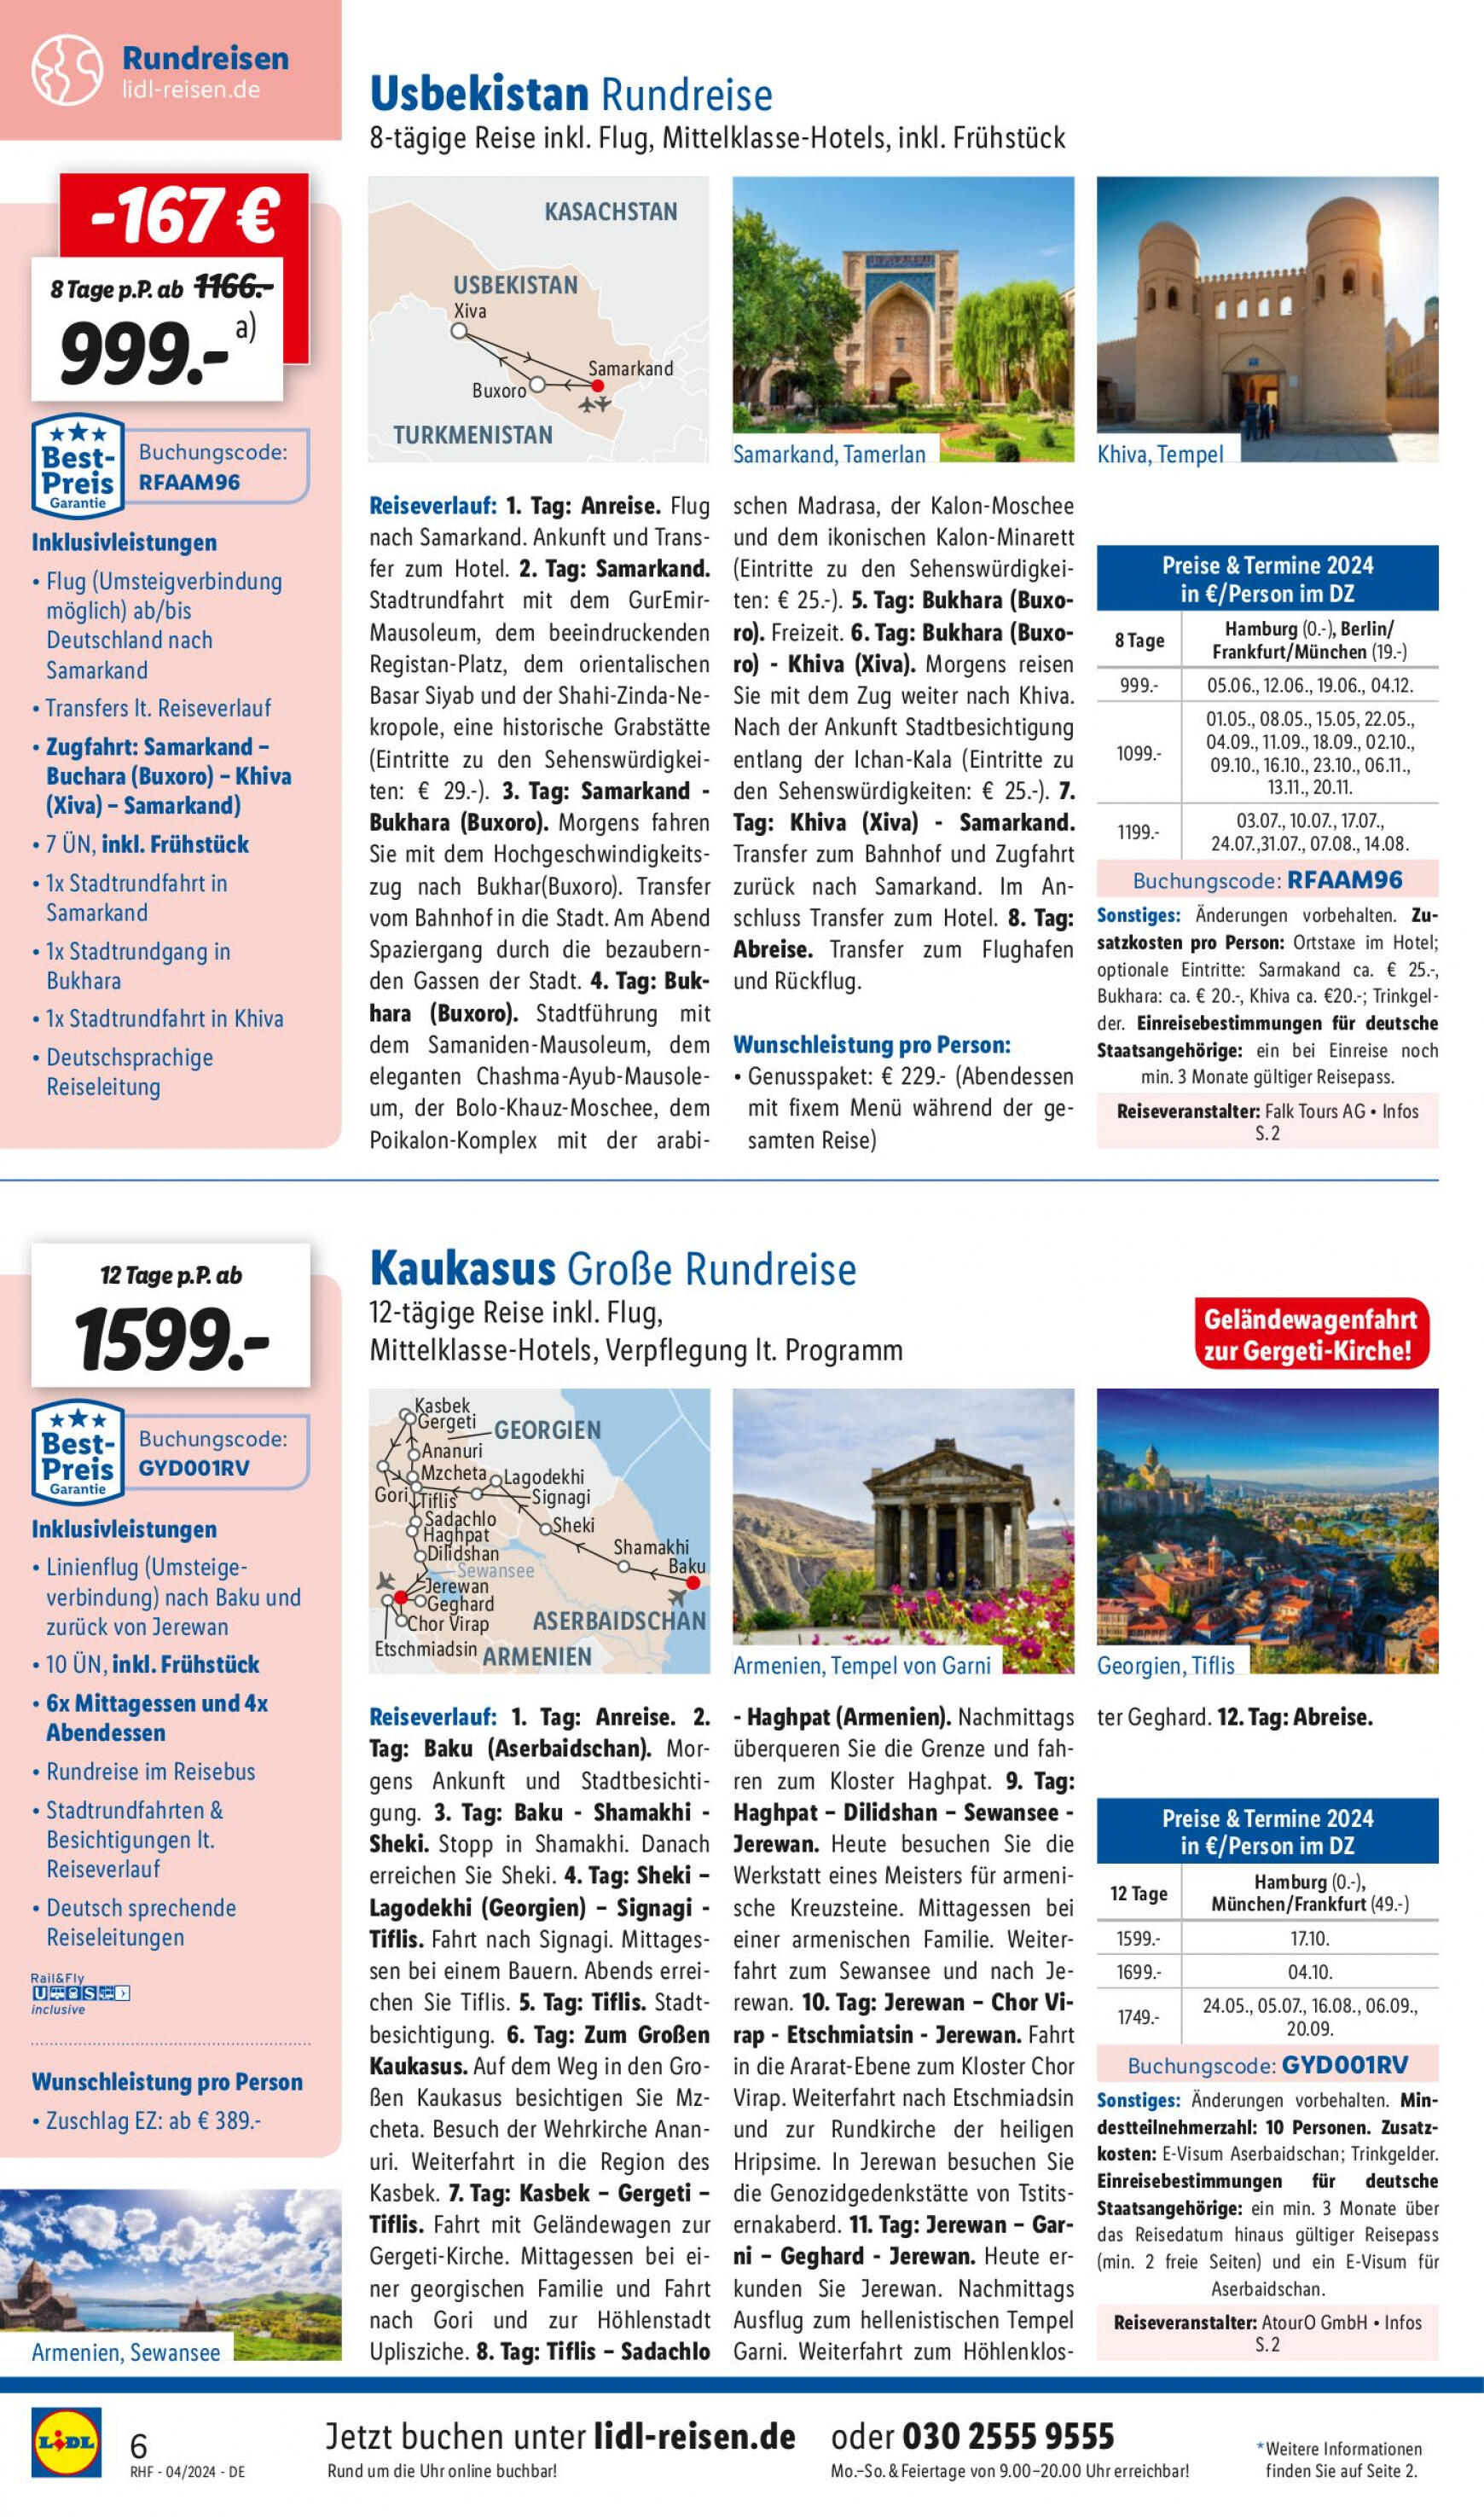 lidl - Flyer Lidl - April Reise-Highlights aktuell 27.03. - 30.04. - page: 6